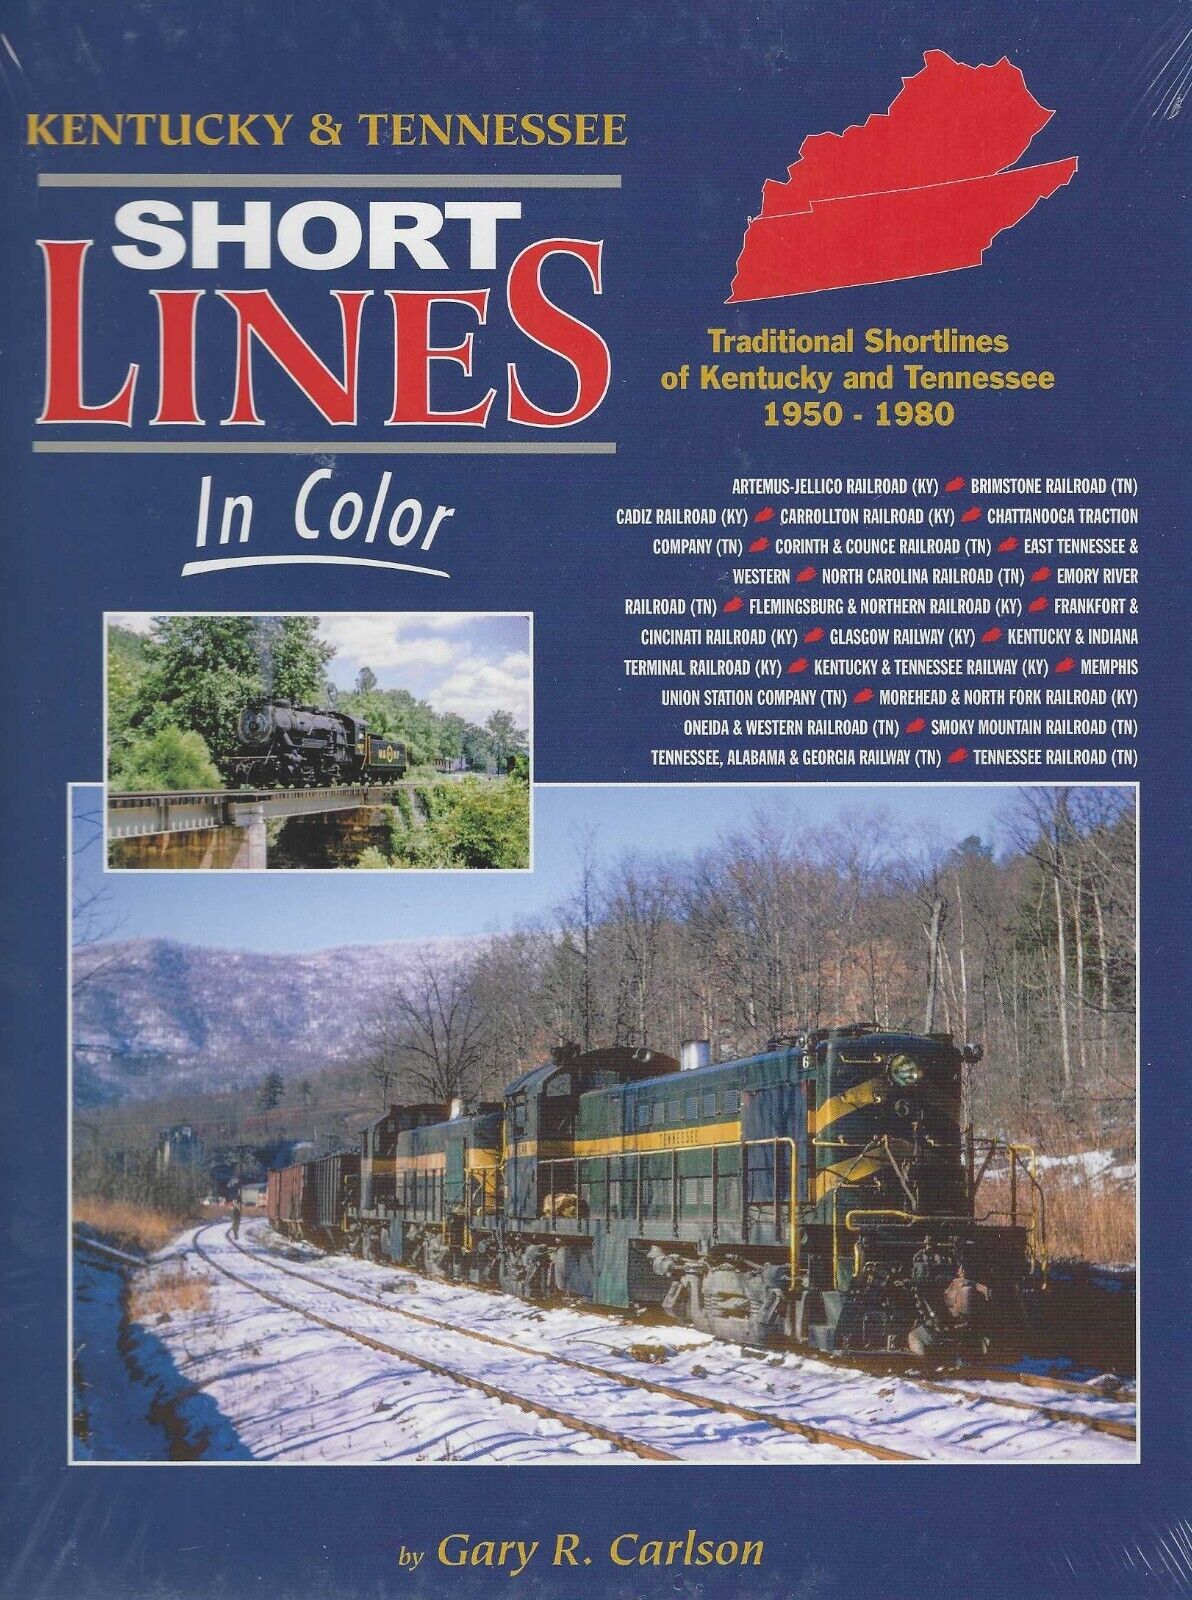 KENTUCKY & TENNESSEE Shortlines in Color: 1950-1980 - (BRAND NEW BOOK)